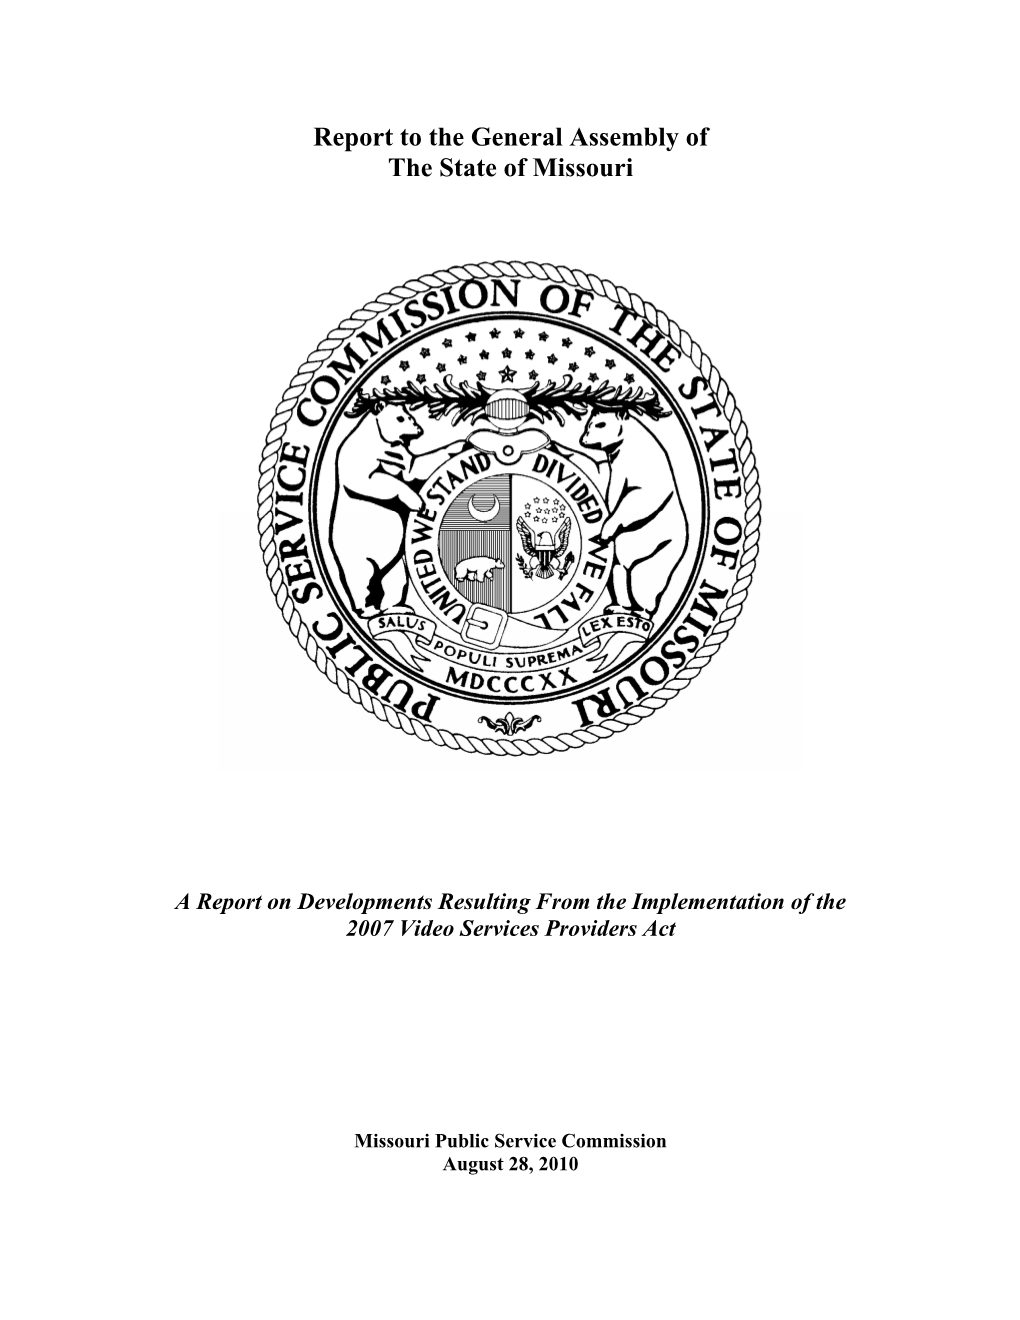 Report to the General Assembly of the State of Missouri